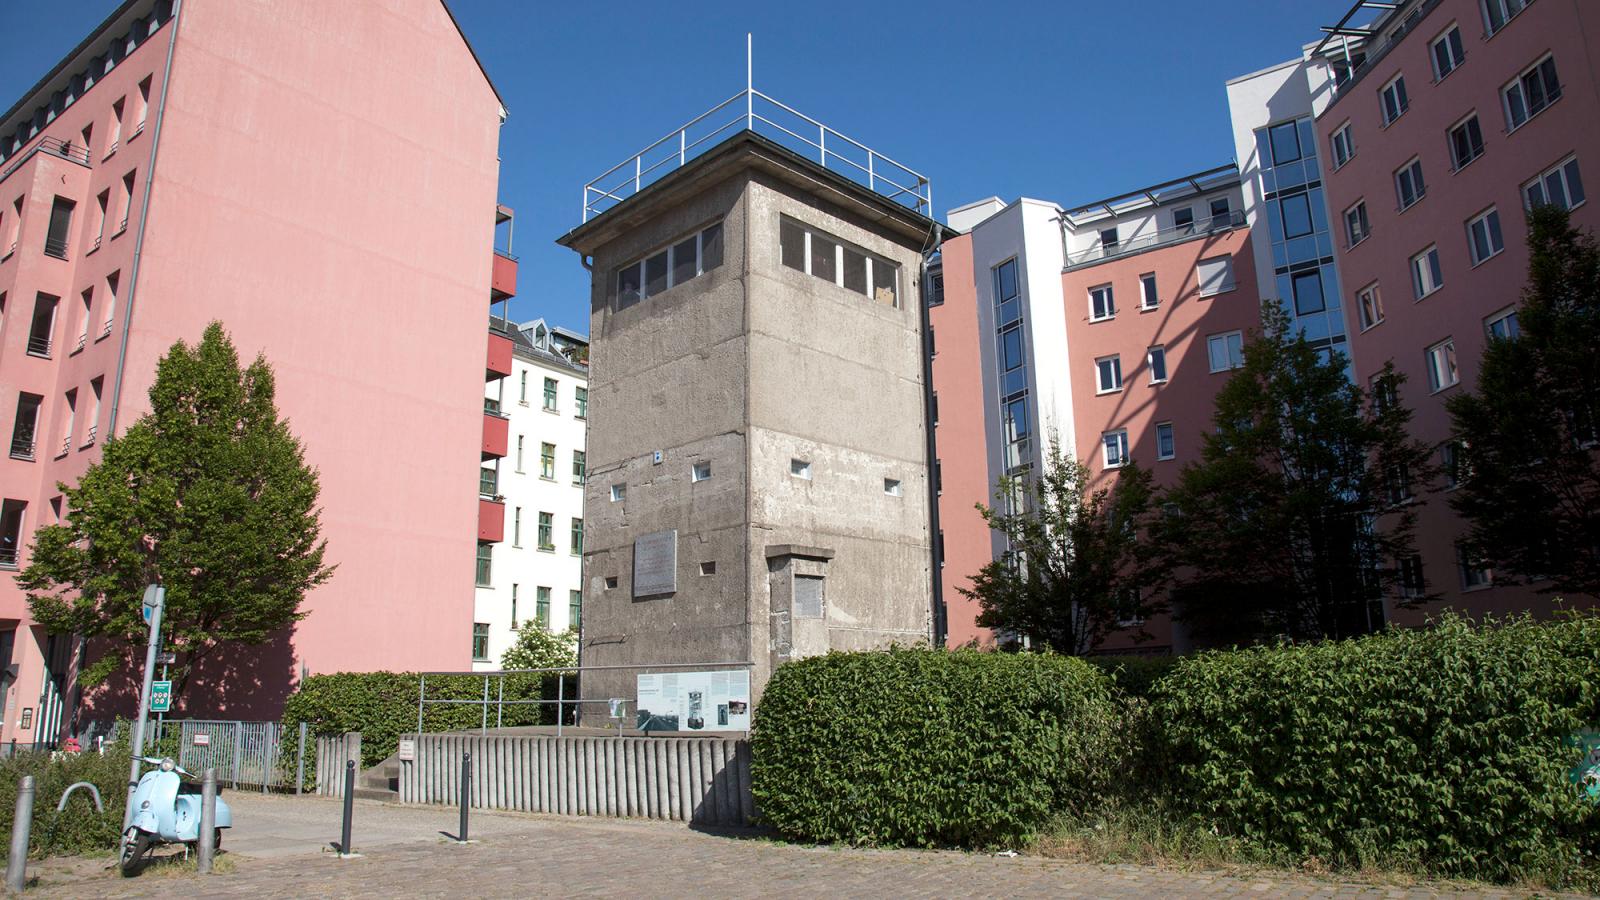 The watchtower at the Günter Litfin Memorial